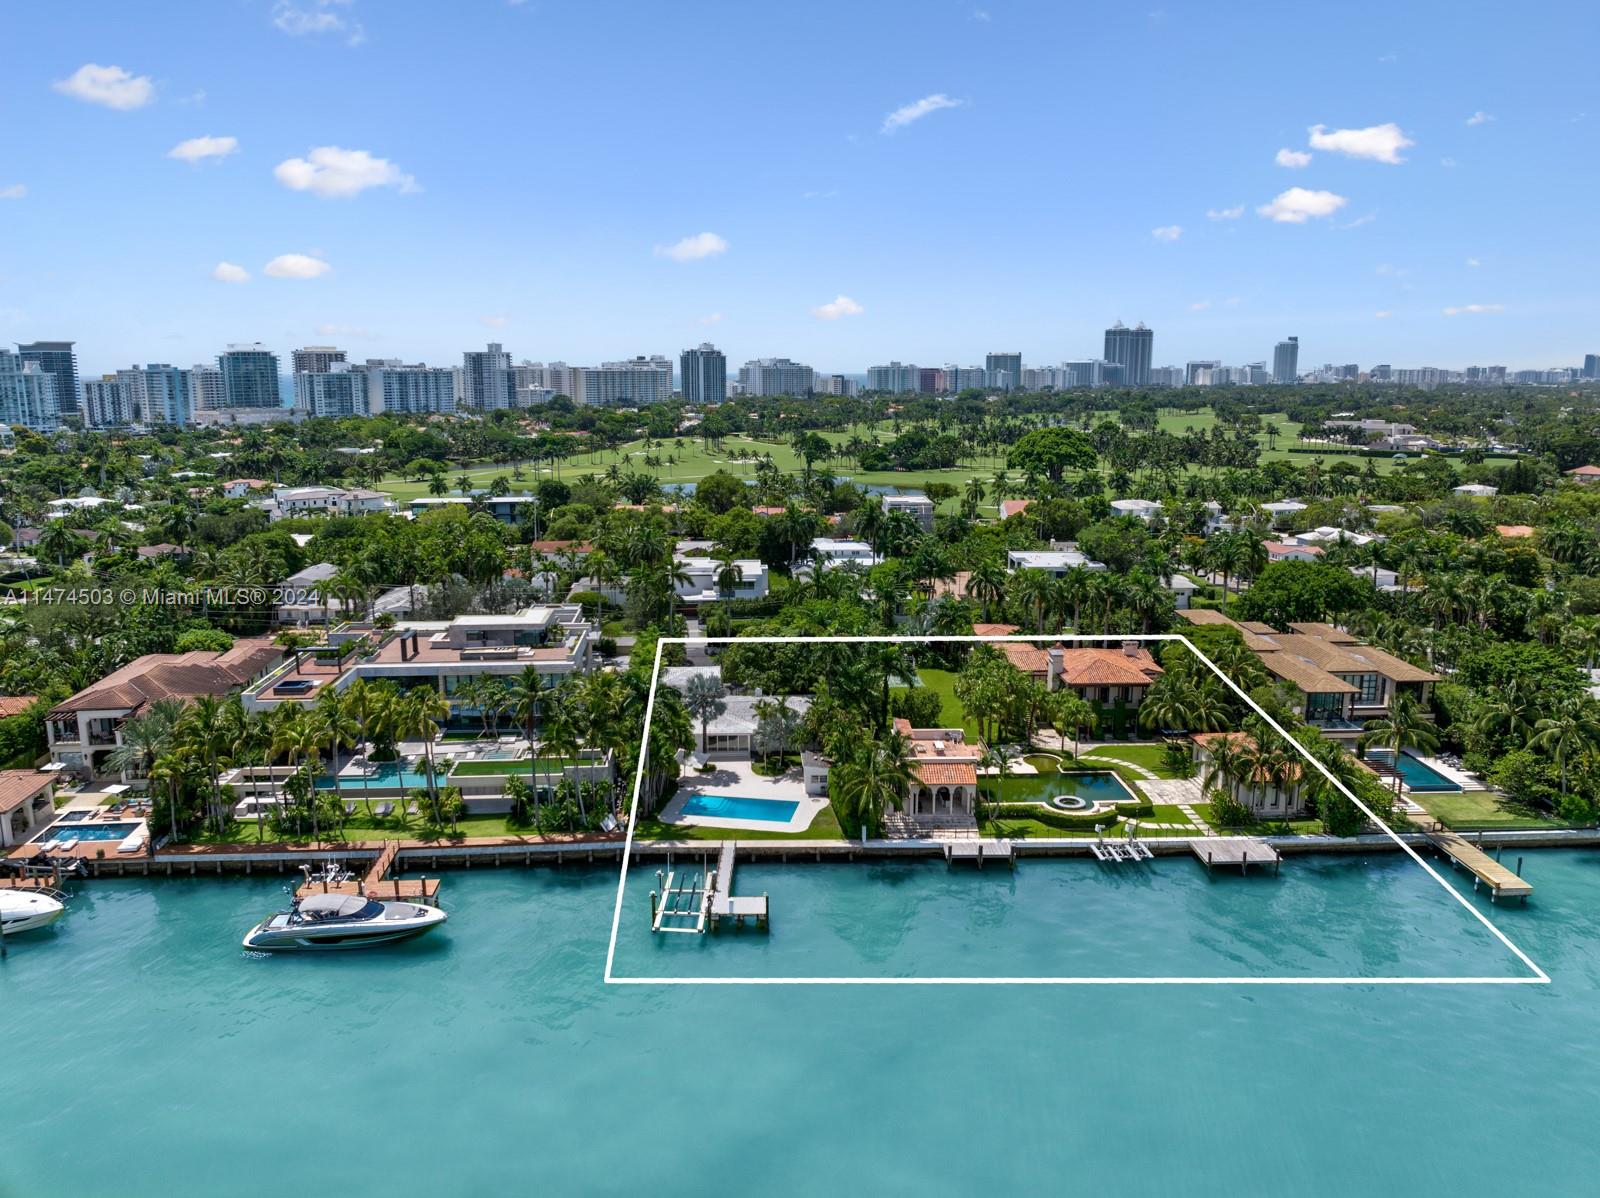 Embrace a rare opportunity on prestigious North Bay Road—a triple lot encompassing 63,376 SF with a total of 245 (+/-) feet of prime waterfront. This unique property combines 170' at 6020-6030 North Bay Rd w/ an additional 75' at 6050 North Bay Rd. Enjoy captivating open bay views from the beautifully livable 12,700 SF (+/-) residence, which can also be leased to generate income while you craft your vision for a dream home. Ideal for the avid boater or yachtsman w/ 3 docks included. A canvas for your aspirations, offering endless possibilities & the chance to create your ideal waterfront sanctuary. Make the most of this rare opportunity to own a piece of North Bay Road's renowned waterfront and bring your vision to life. Property may be sold w/ DRB approved plans by world renown architect.